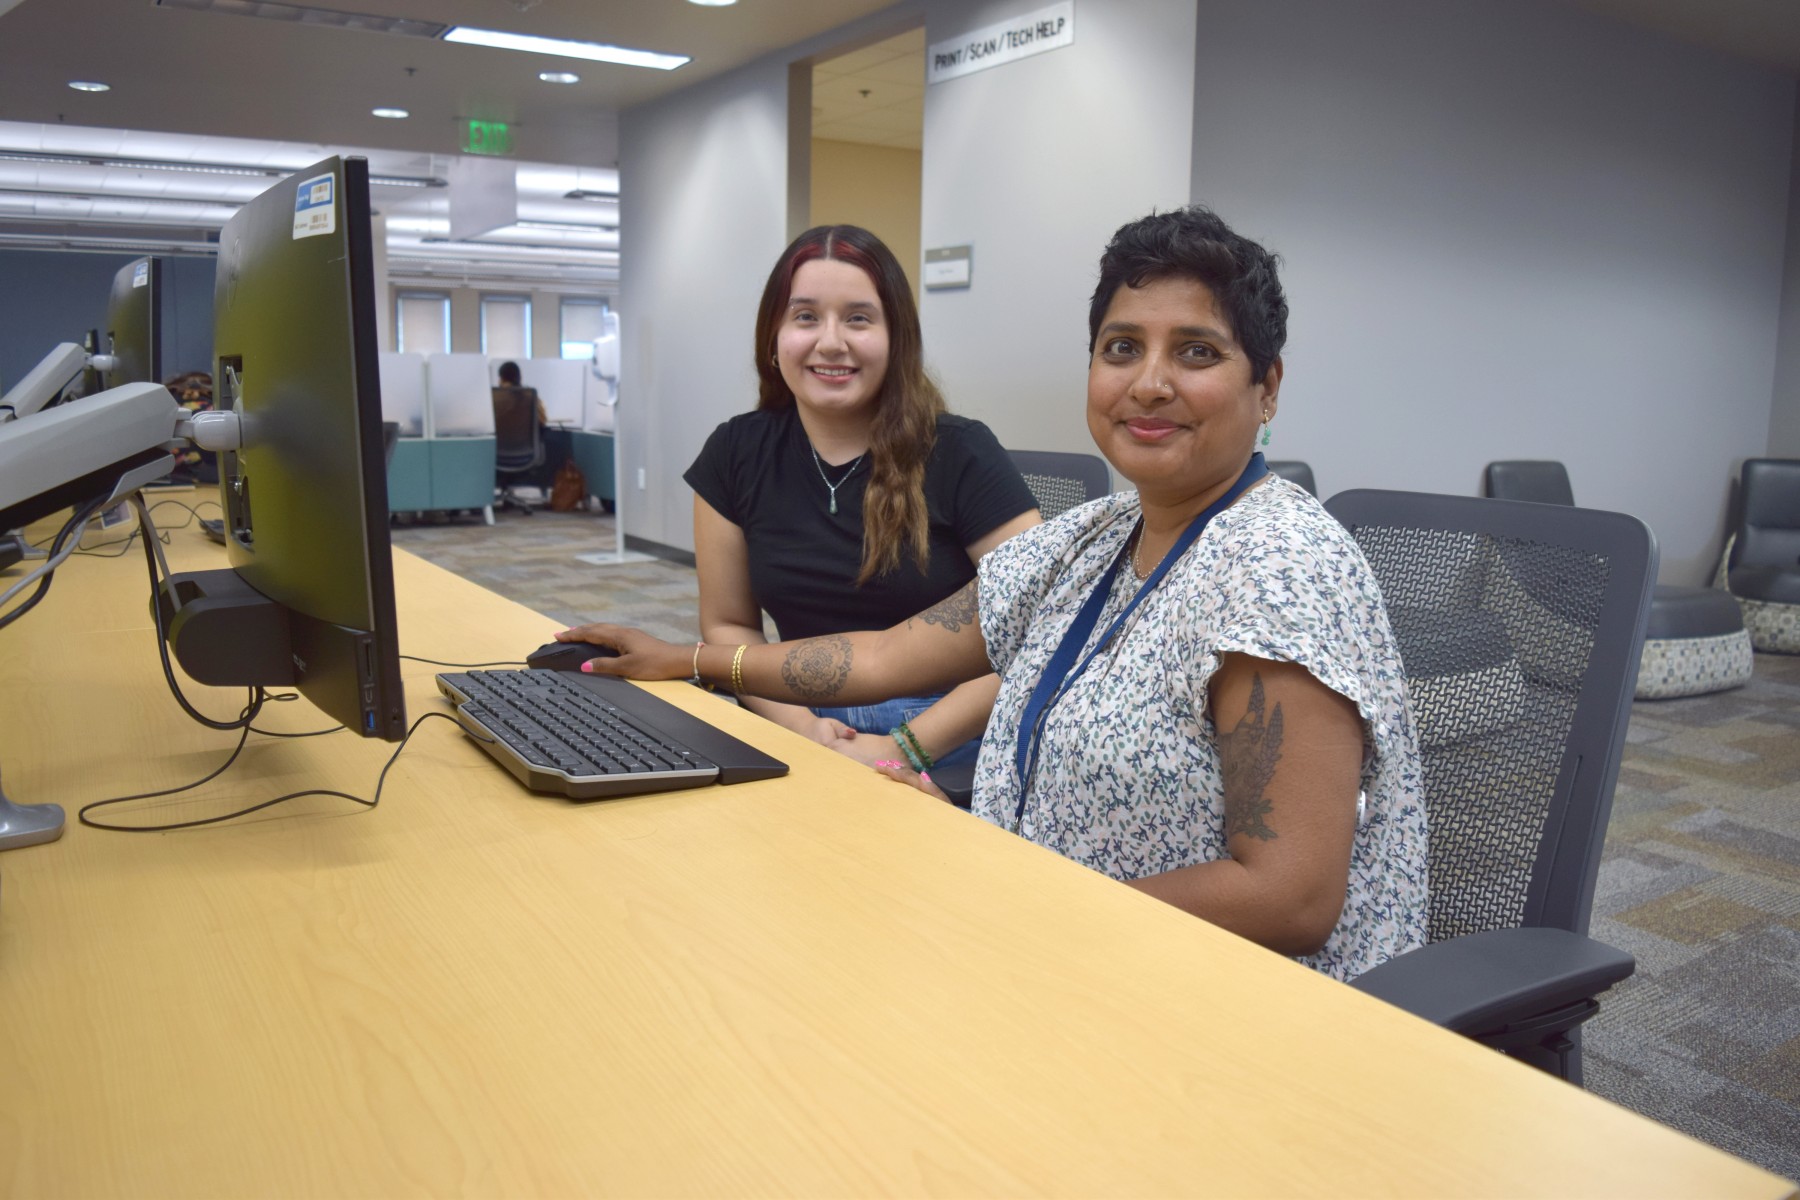 Social Sciences Librarian Lalitha Nataraj shows some of the University Library's new ethnic studies resources to student Graciela Gerardo.